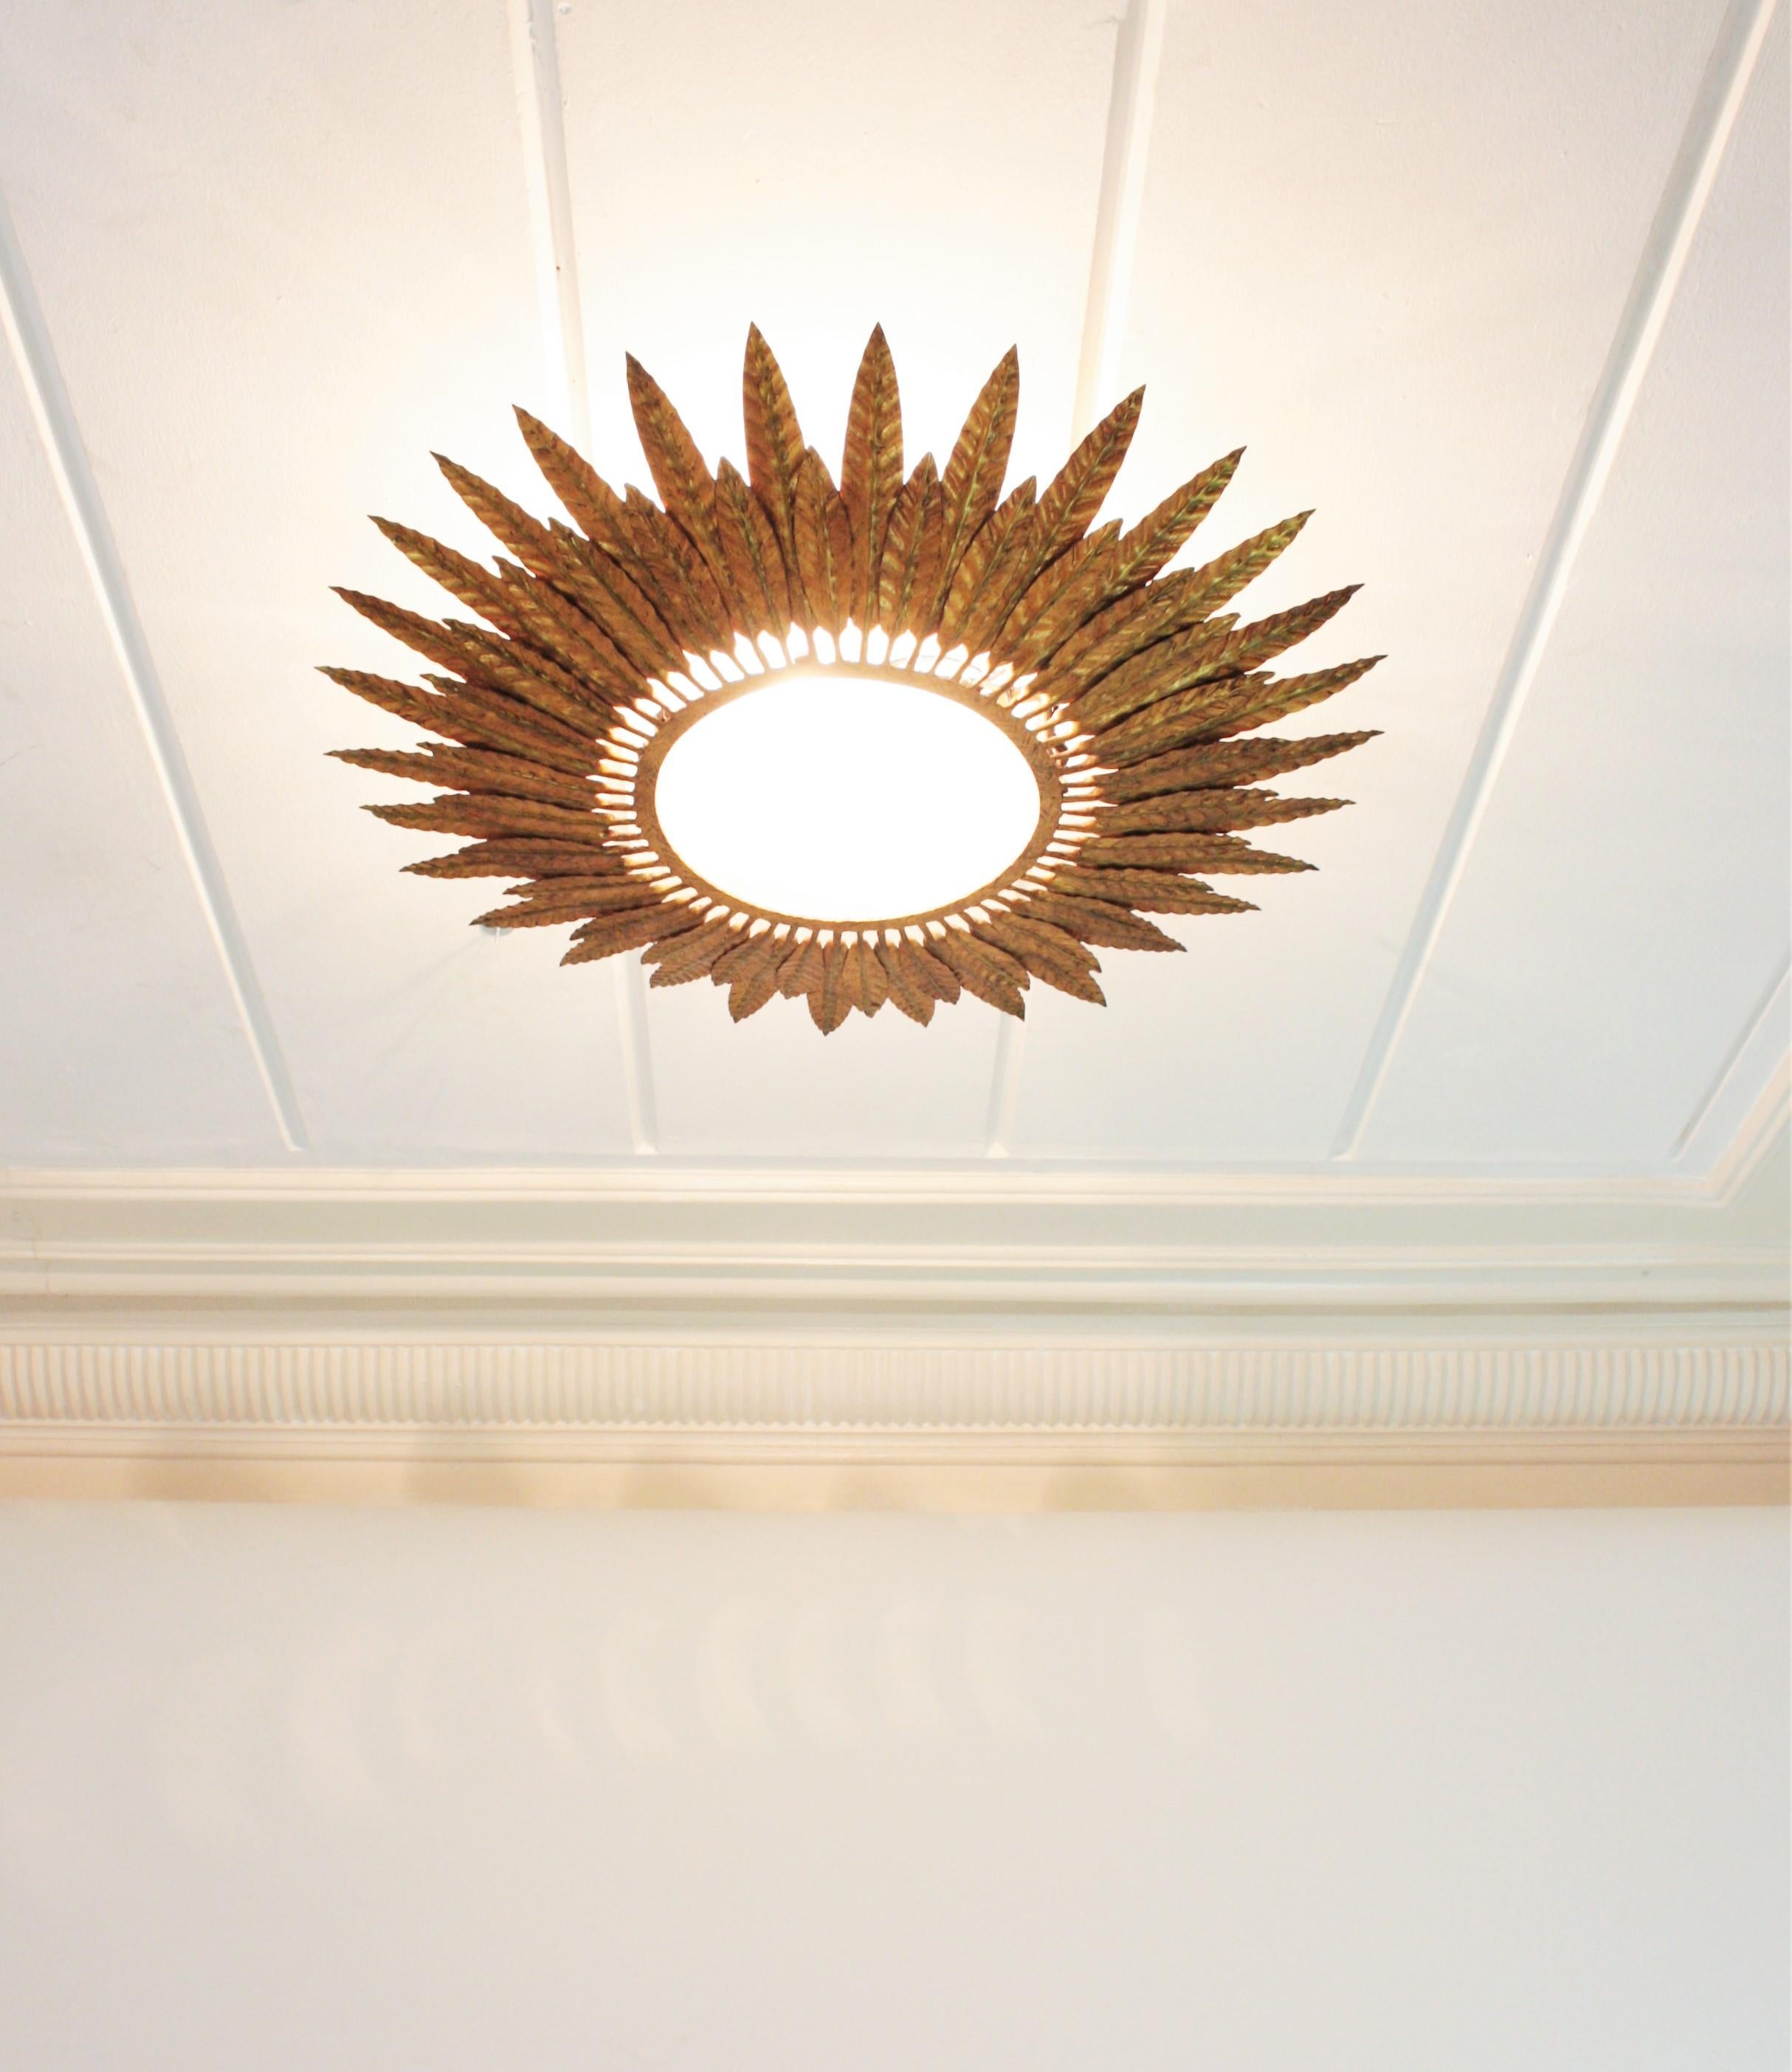 Spanish Gilt Iron Sunburst Leafed Light Fixture with Frosted Glass, Spain, 1950s For Sale